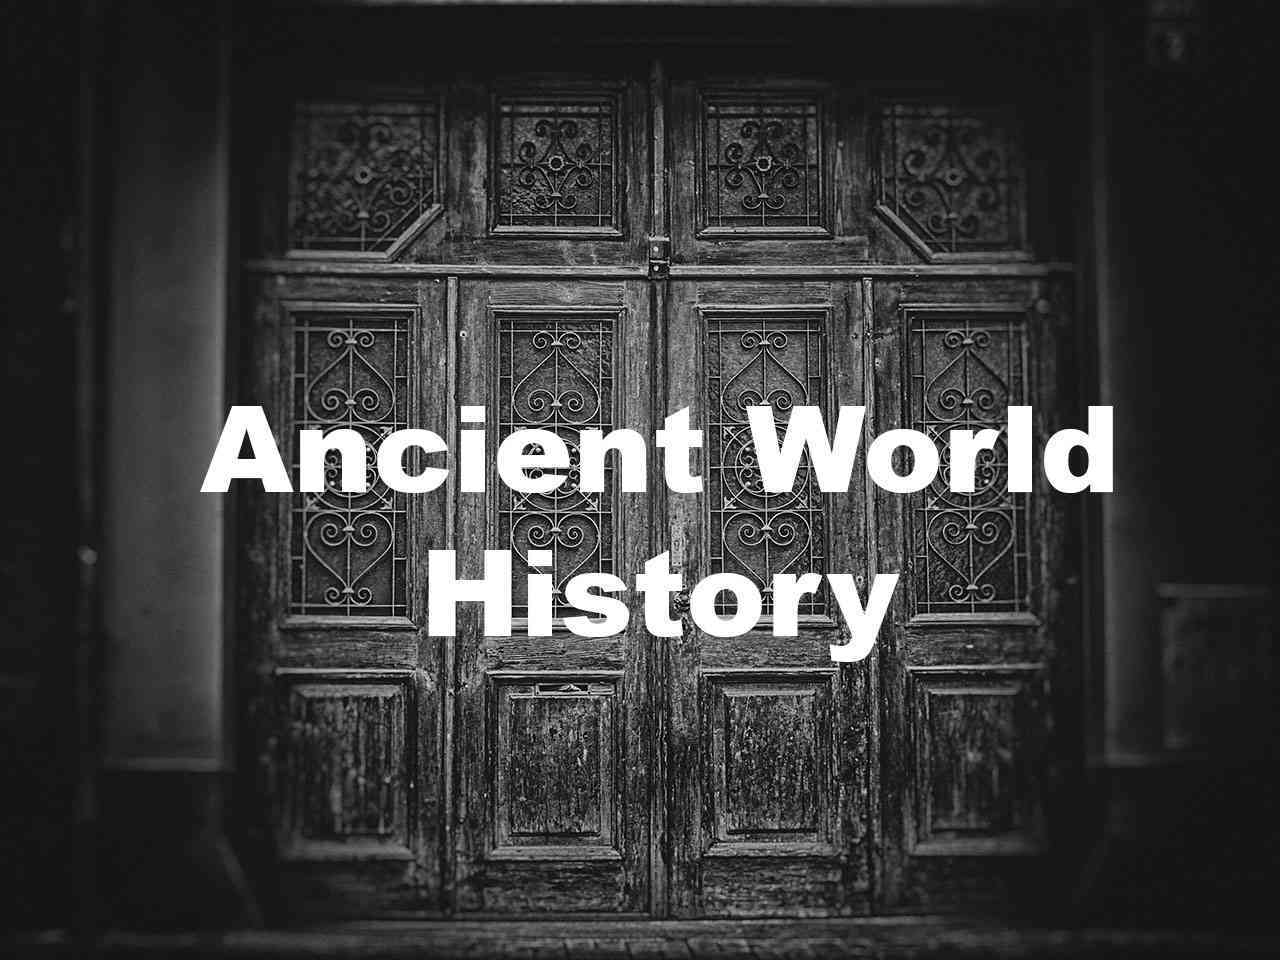 Ancient World History Questions and Answers